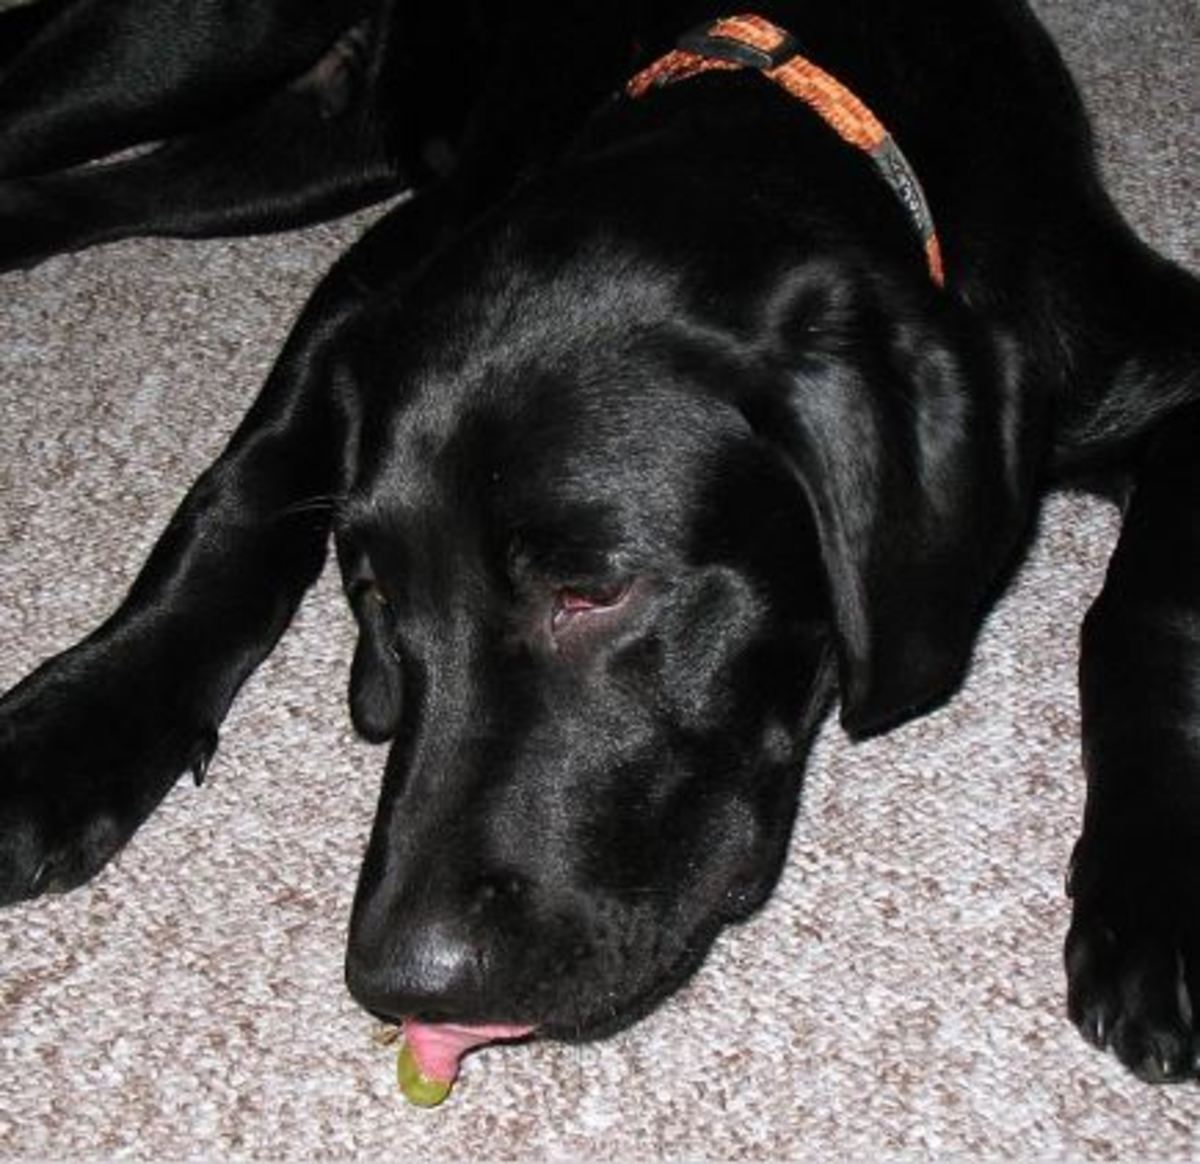 Dog ate grapes, grape toxicity in dogs